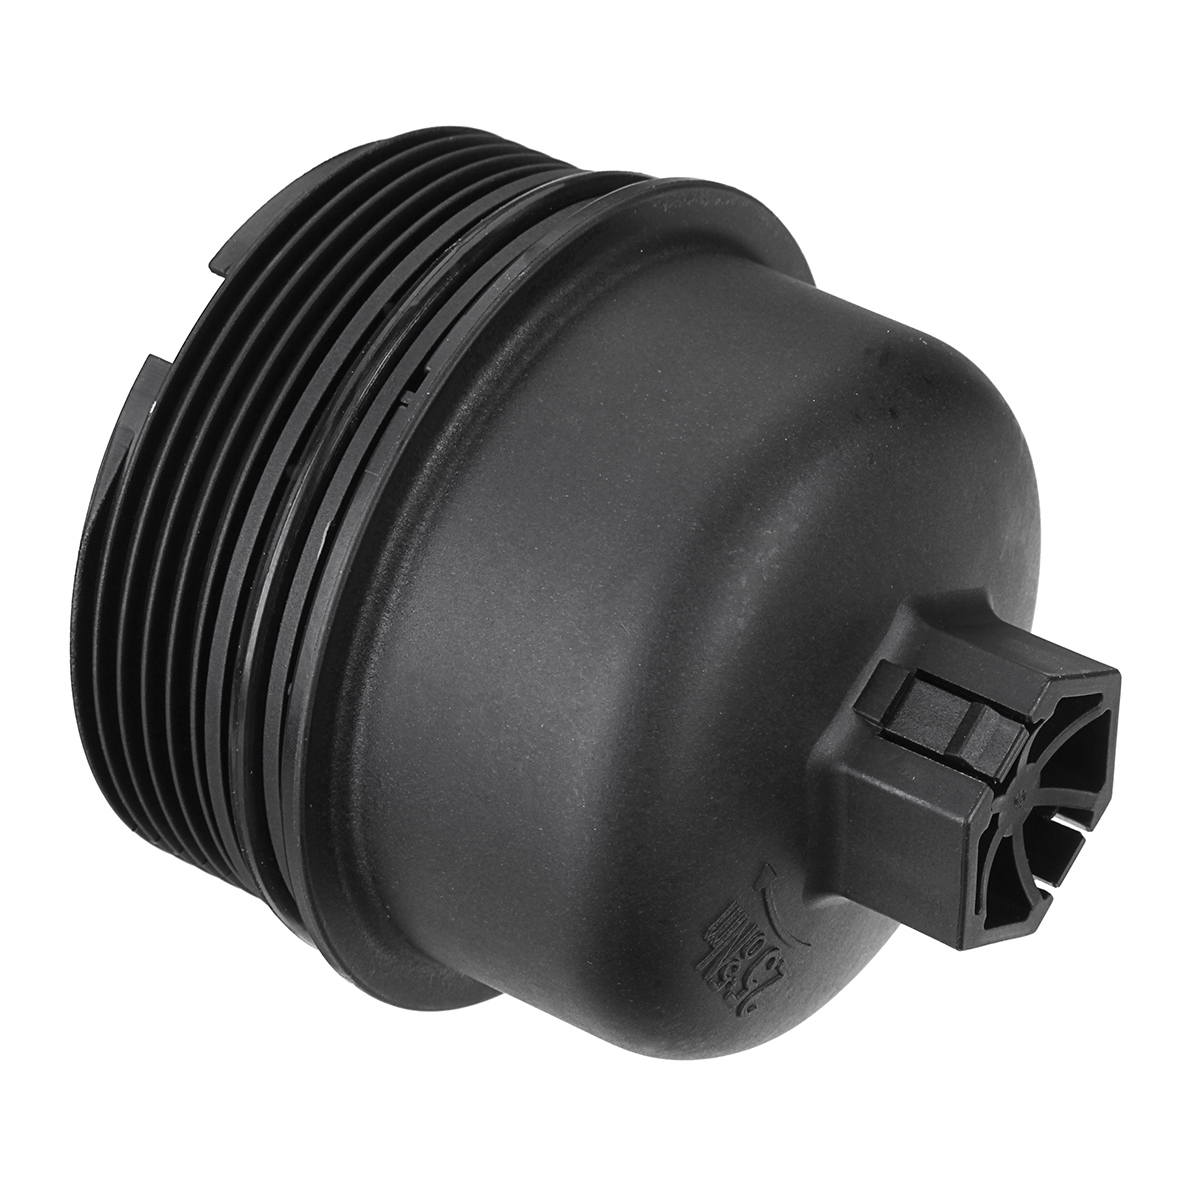 Oil-Filter-Lid-Housing-Top-Cover-Cap-For-Ford-Transit-MK7-Galaxy-Mondeo-Focus-1368557